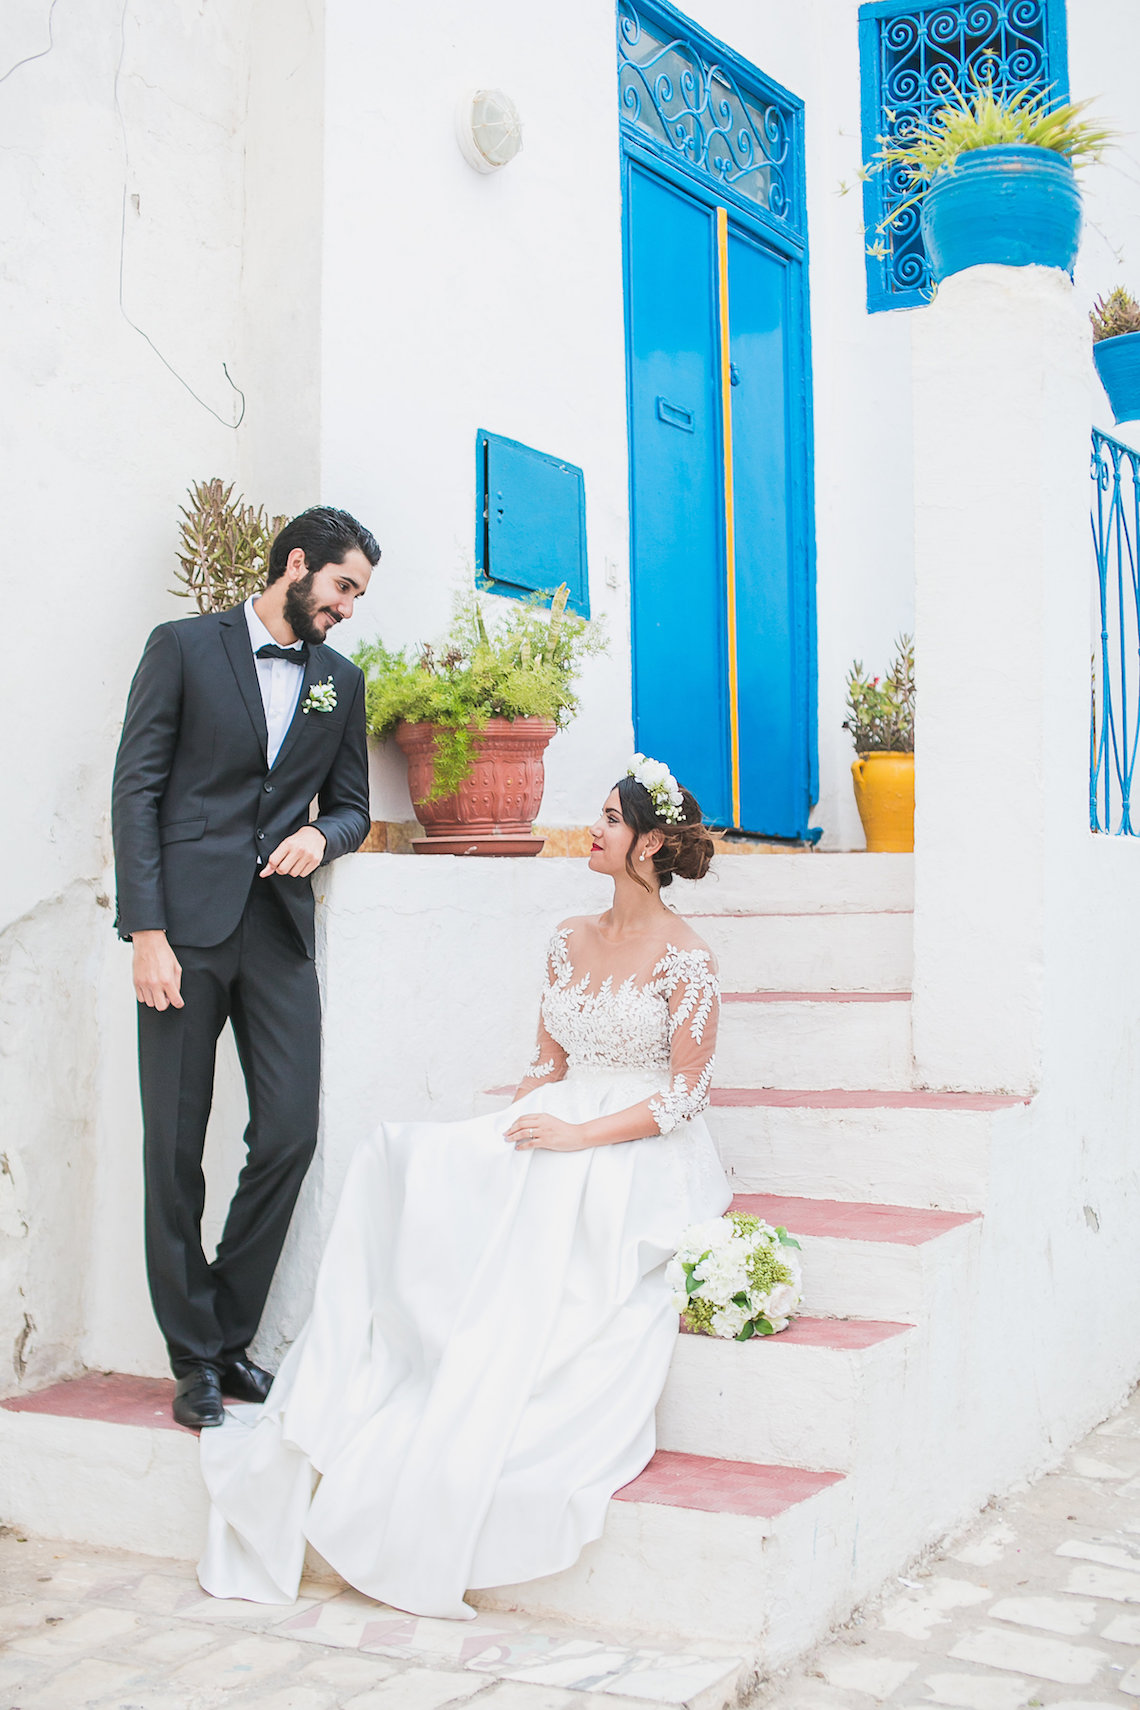 Mediterranean Meets Africa; Colorful Tunisian Wedding Inspiration | Ness Photography 28